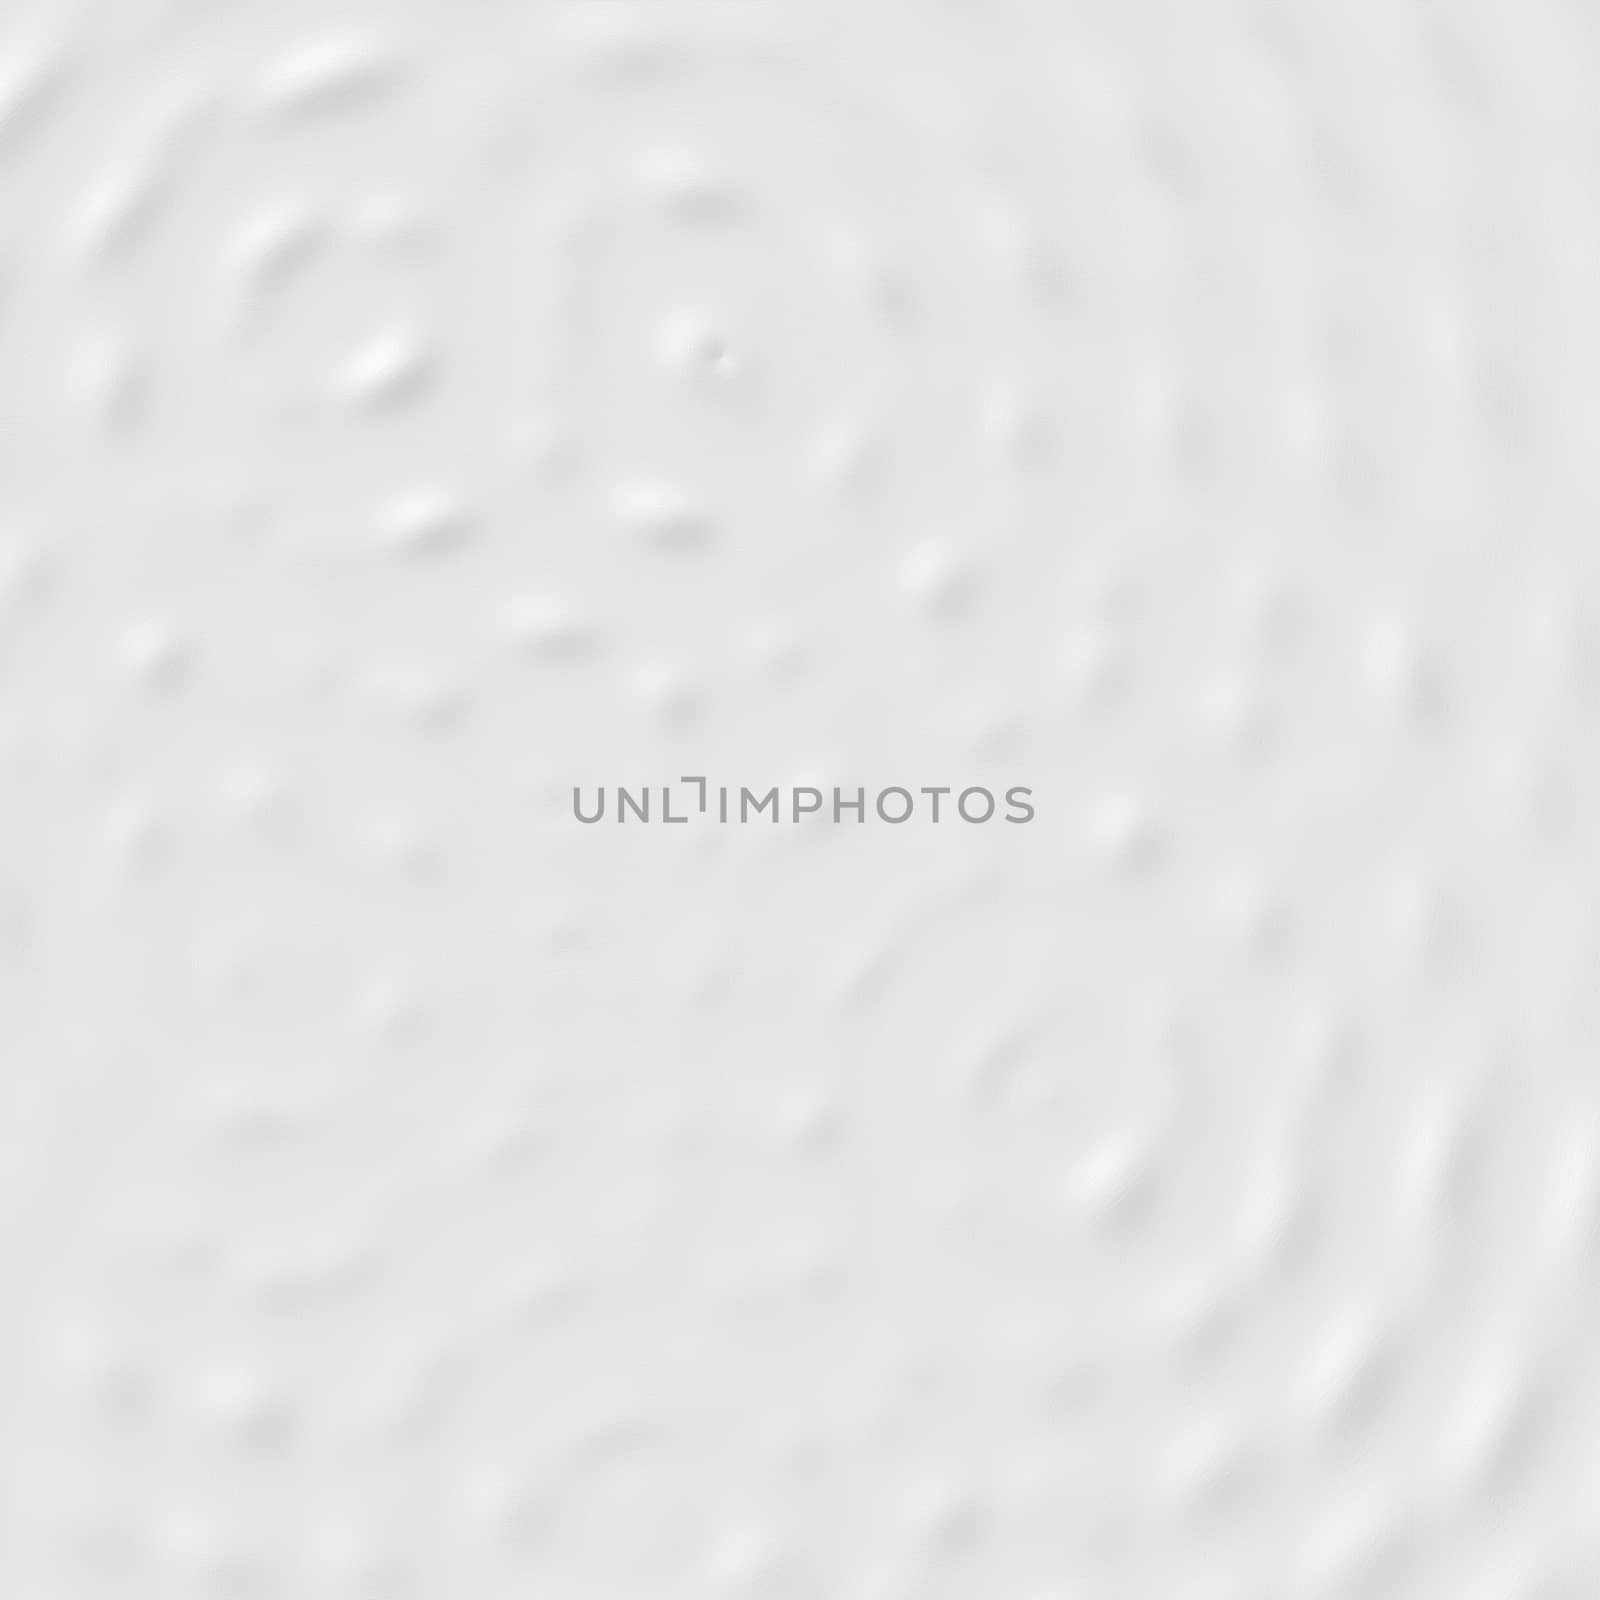 Abstract soft background, texture of white liquid or white cream surface